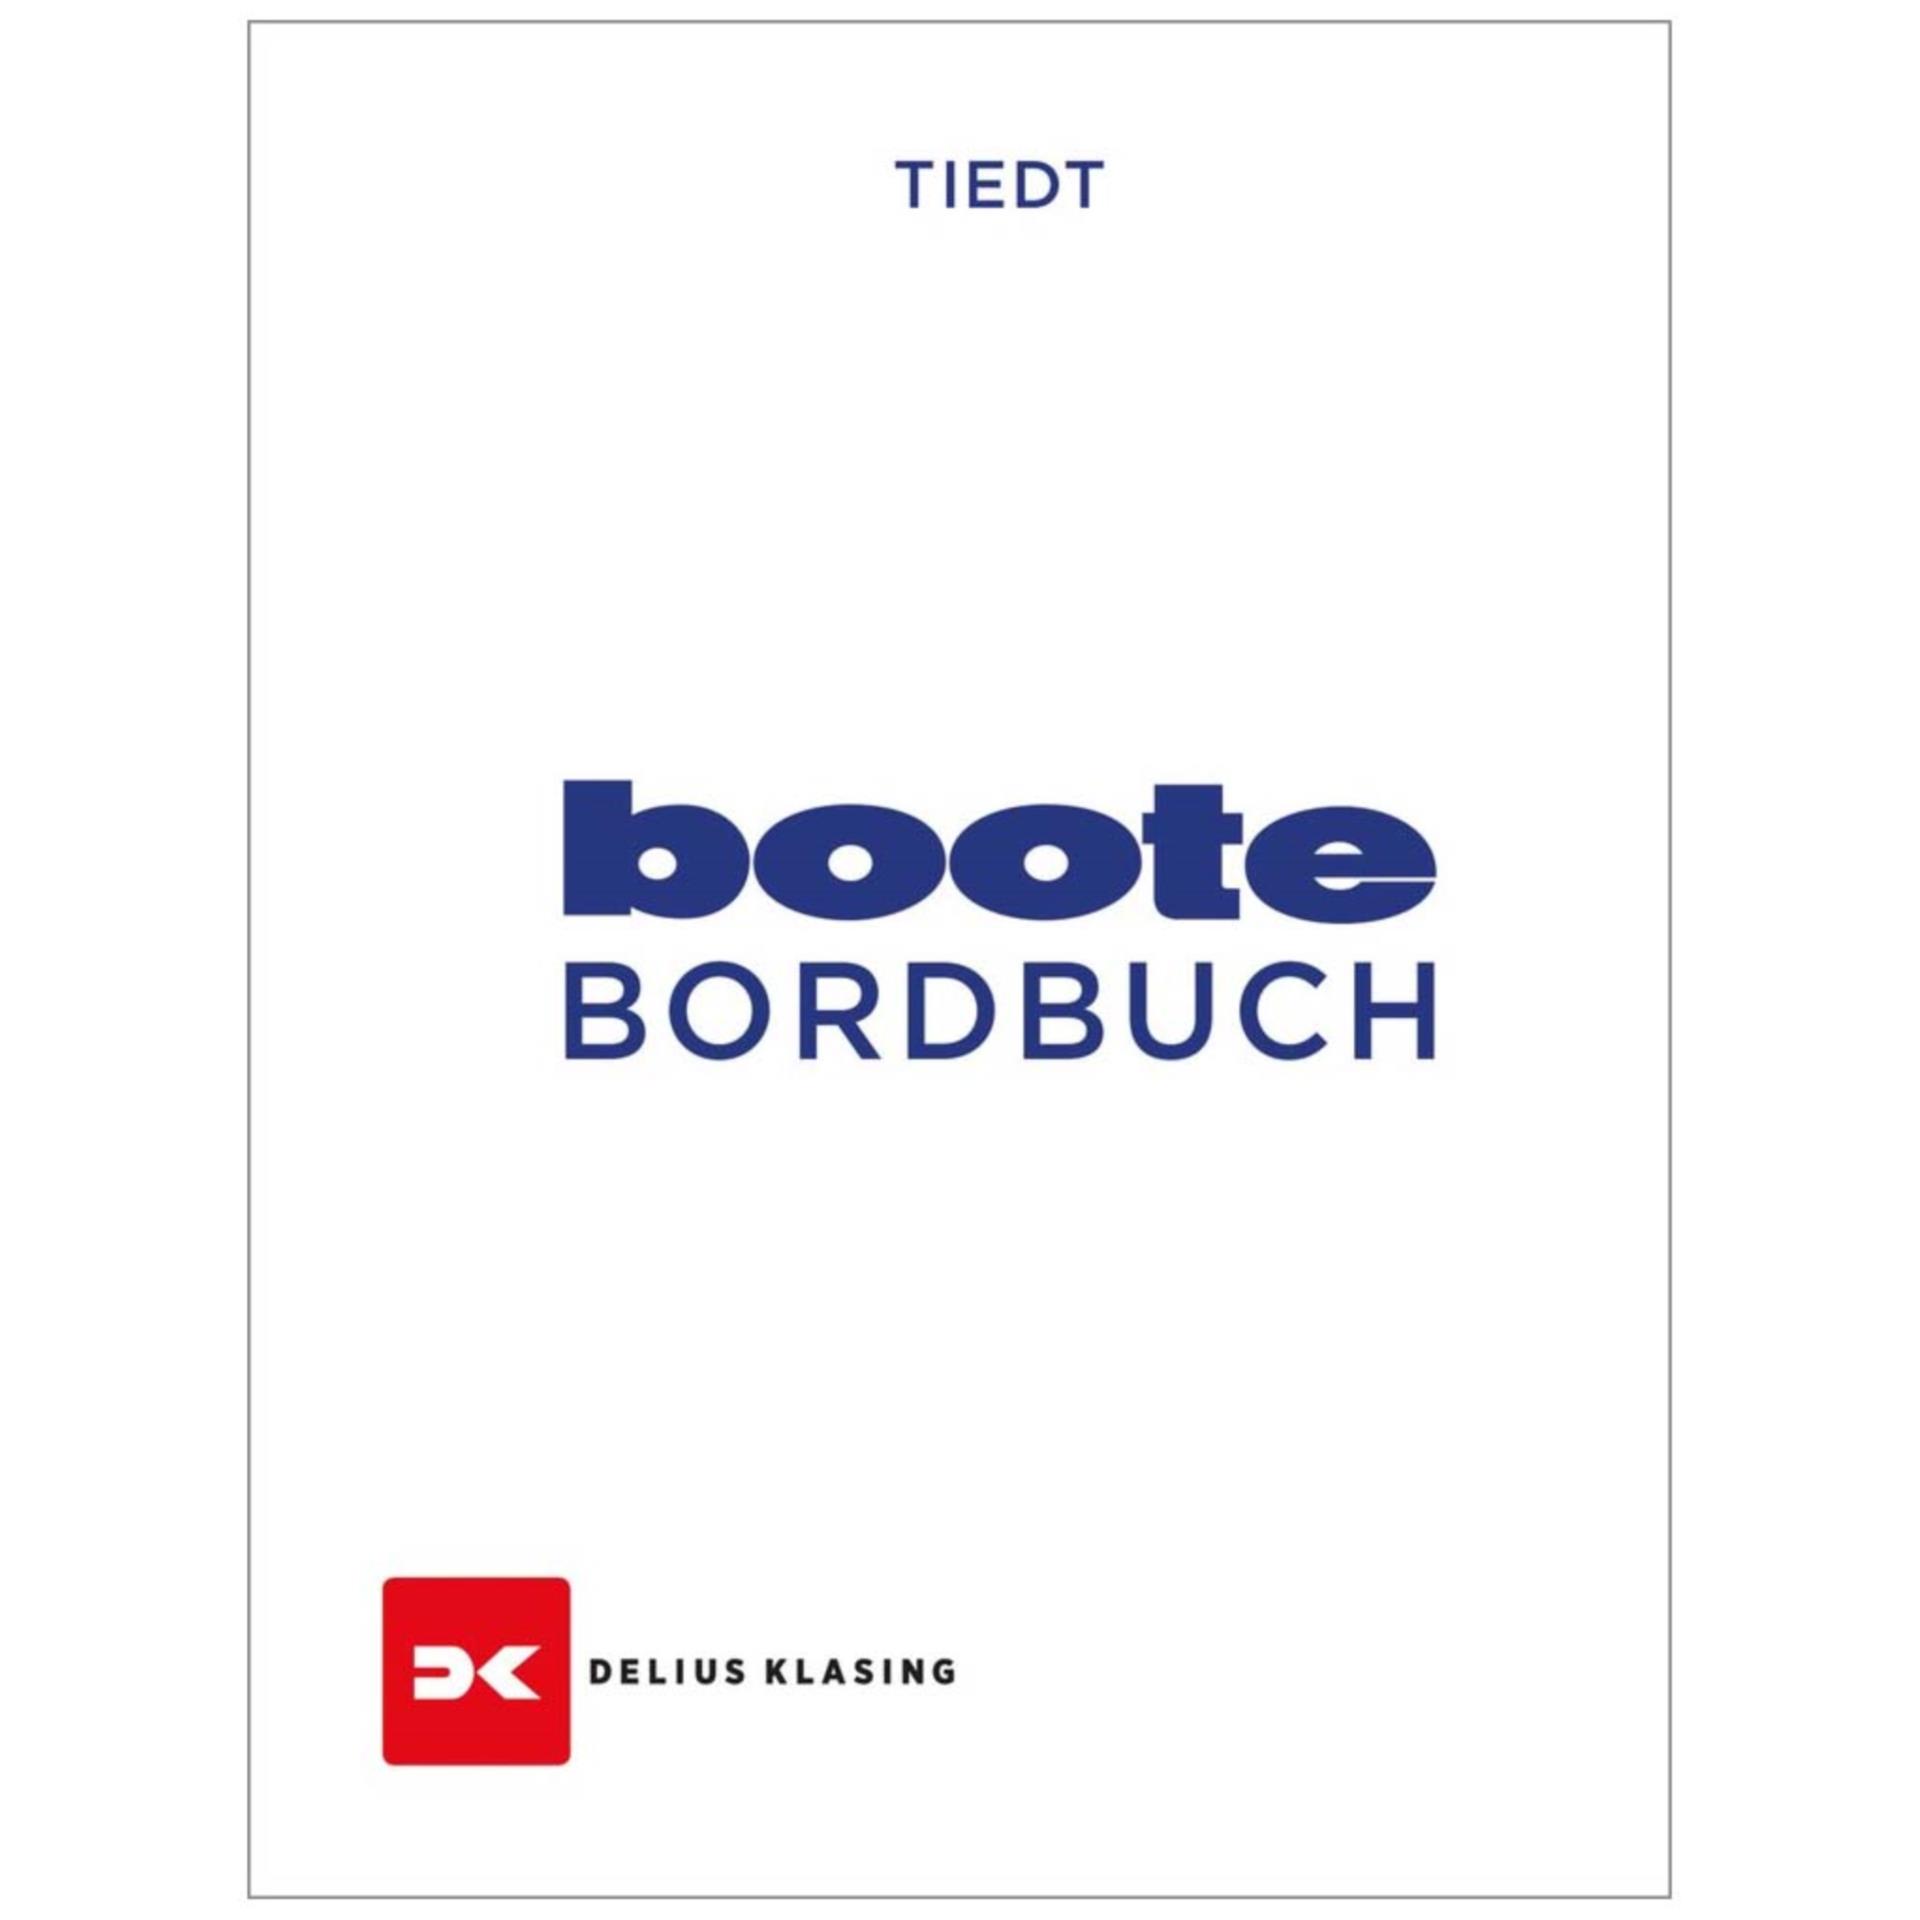 Boote Bordbuch - Christian Tiedt